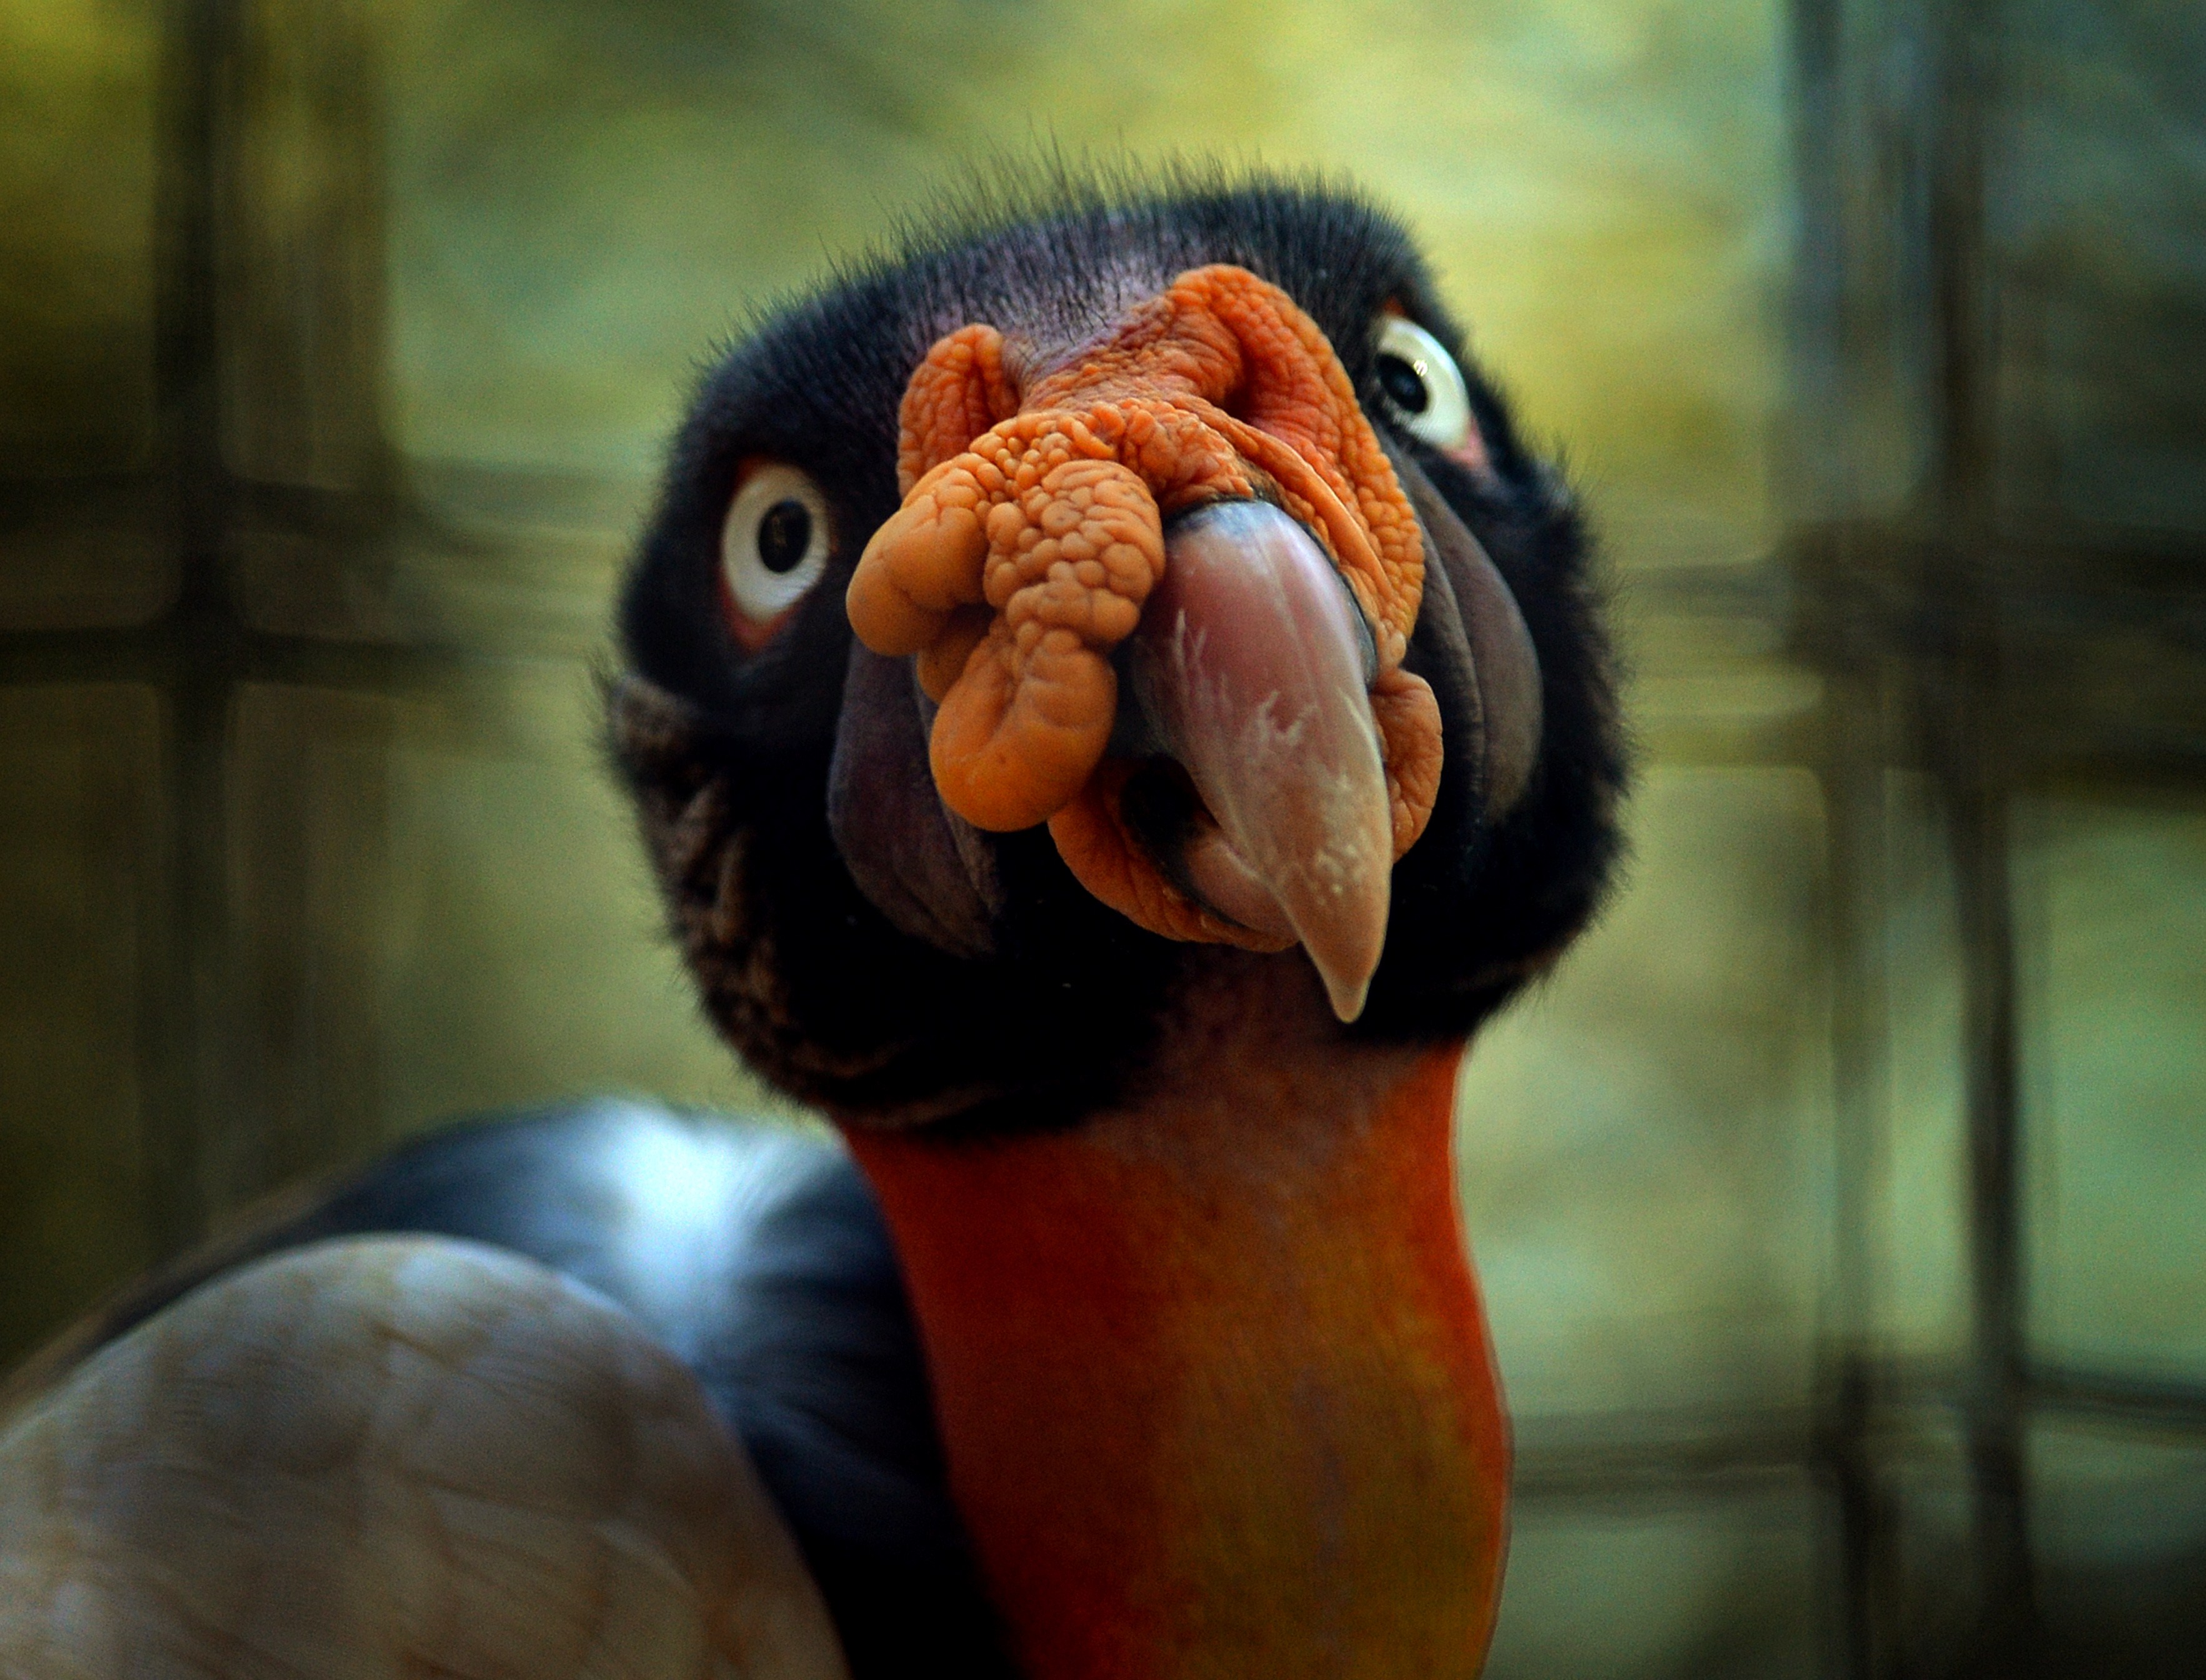 The face of a king vulture.